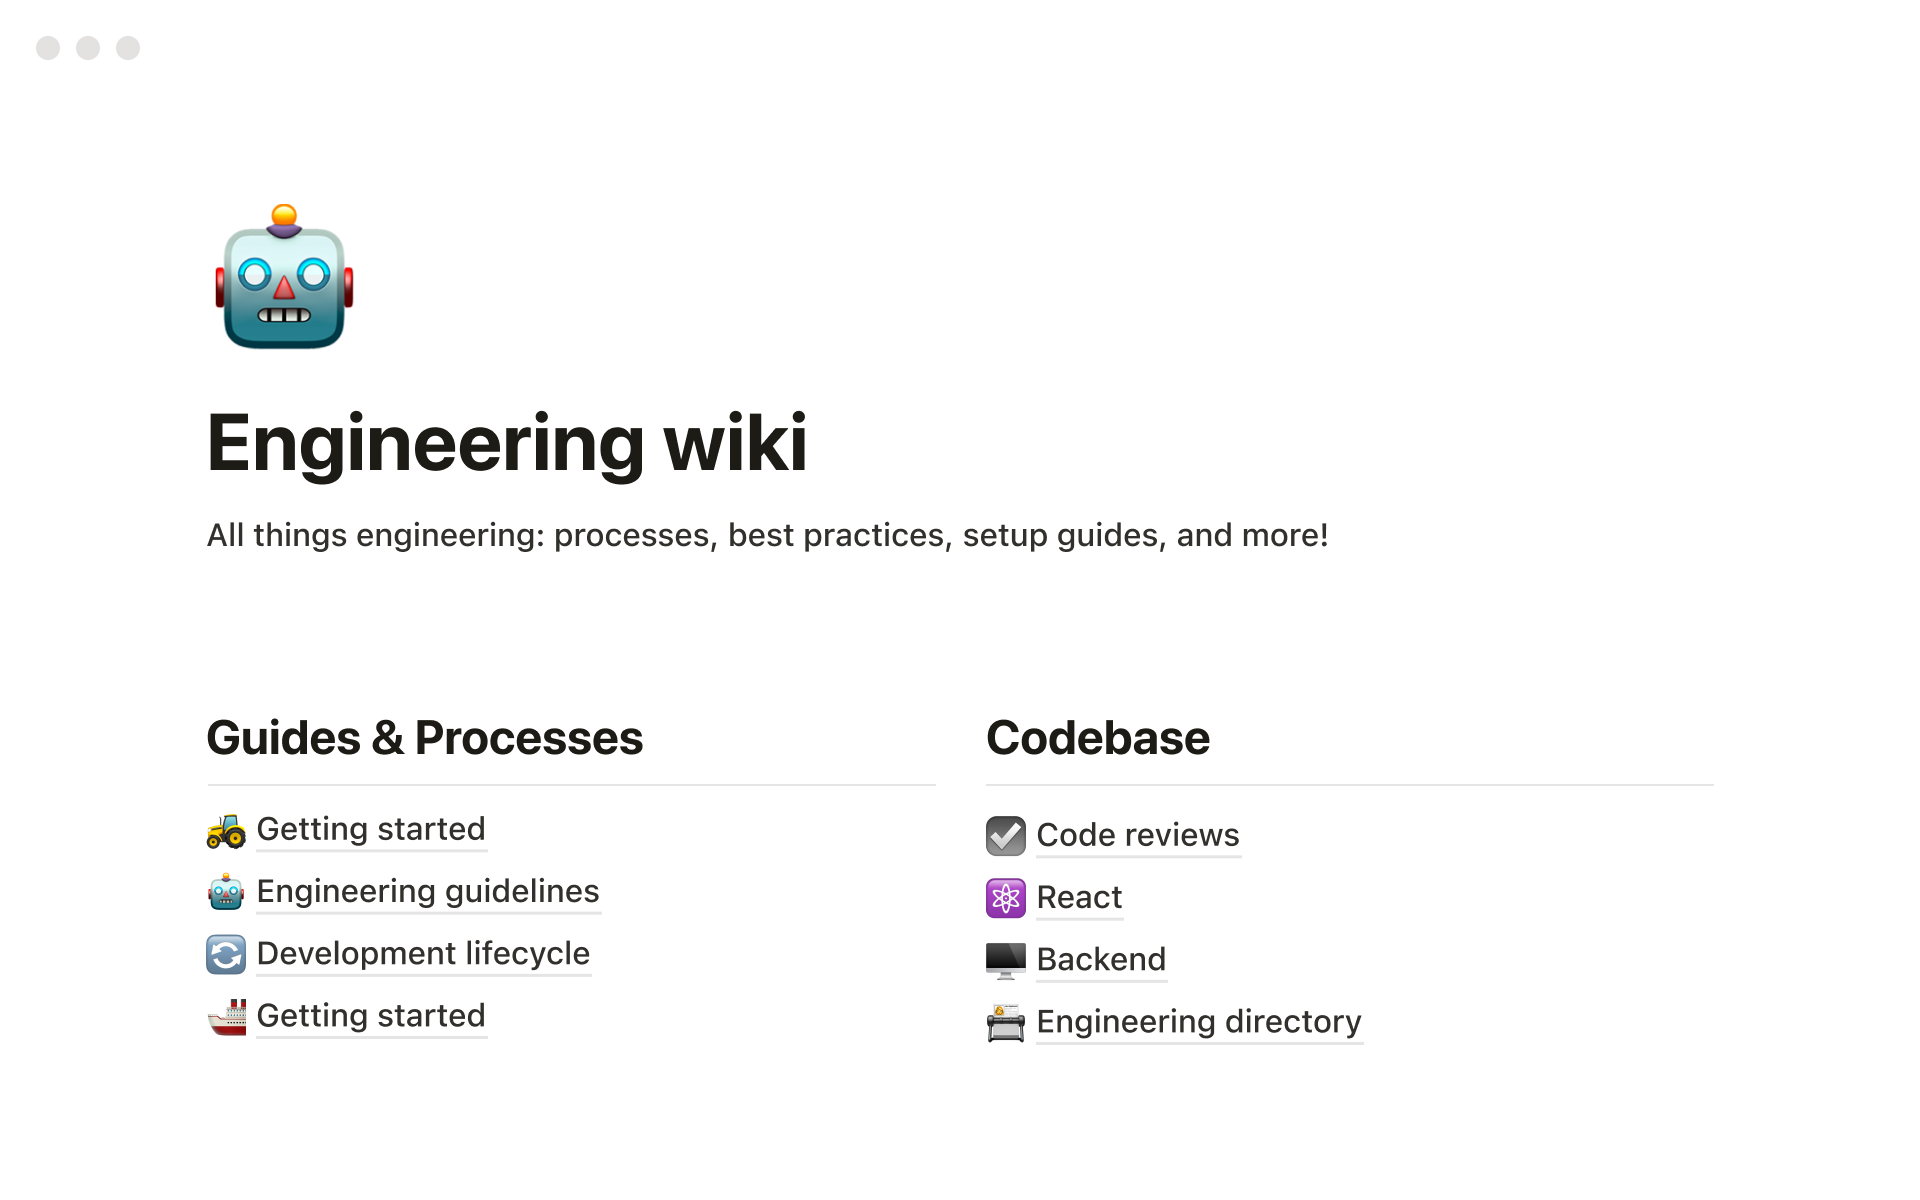 Engineering wiki with processes, best practices, setup guides and more!